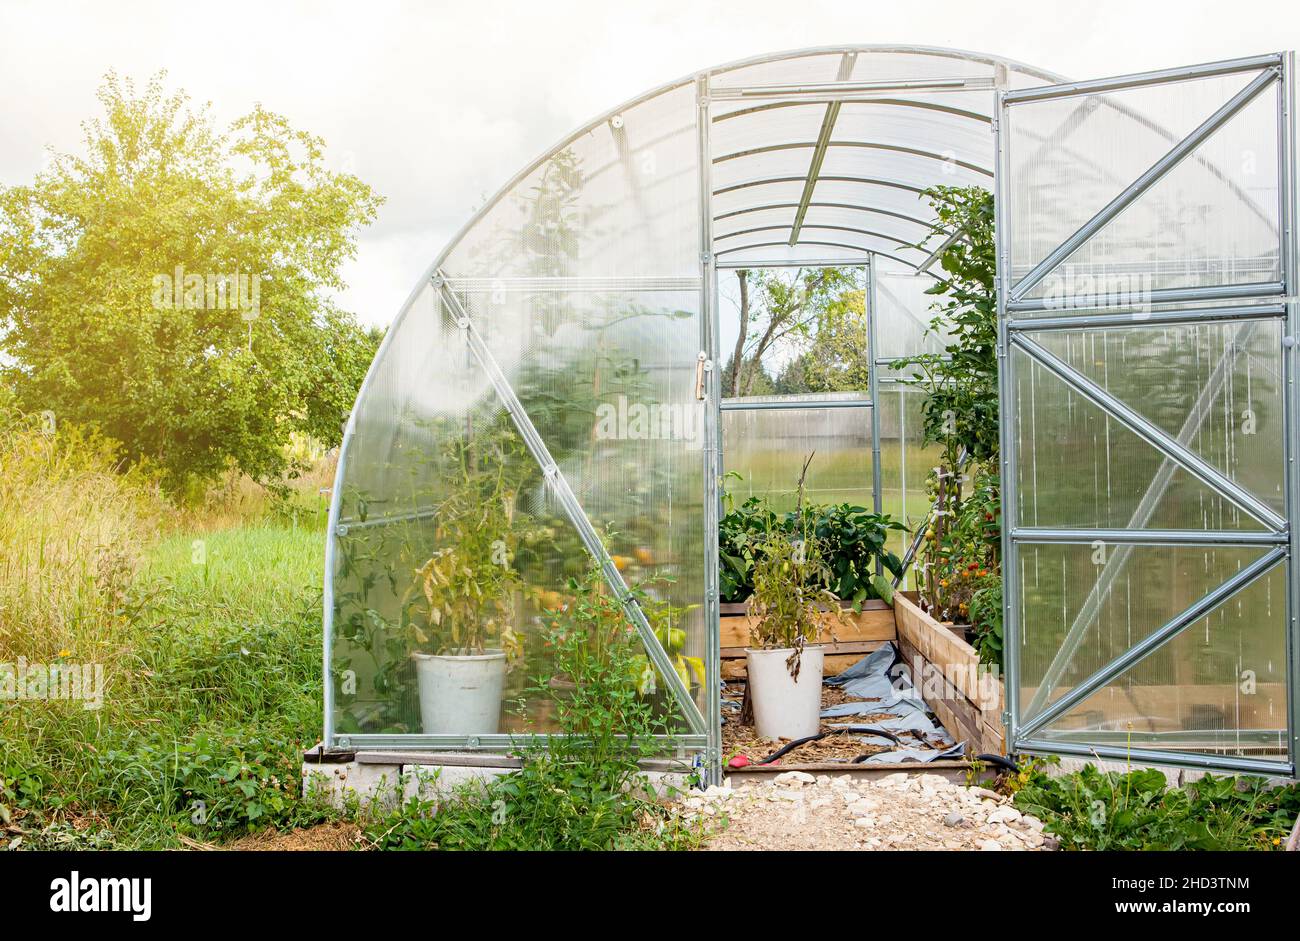 Exterior of home use new plastic greenhouse in warm summer day. Tomato plants growing inside, copy space. Stock Photo